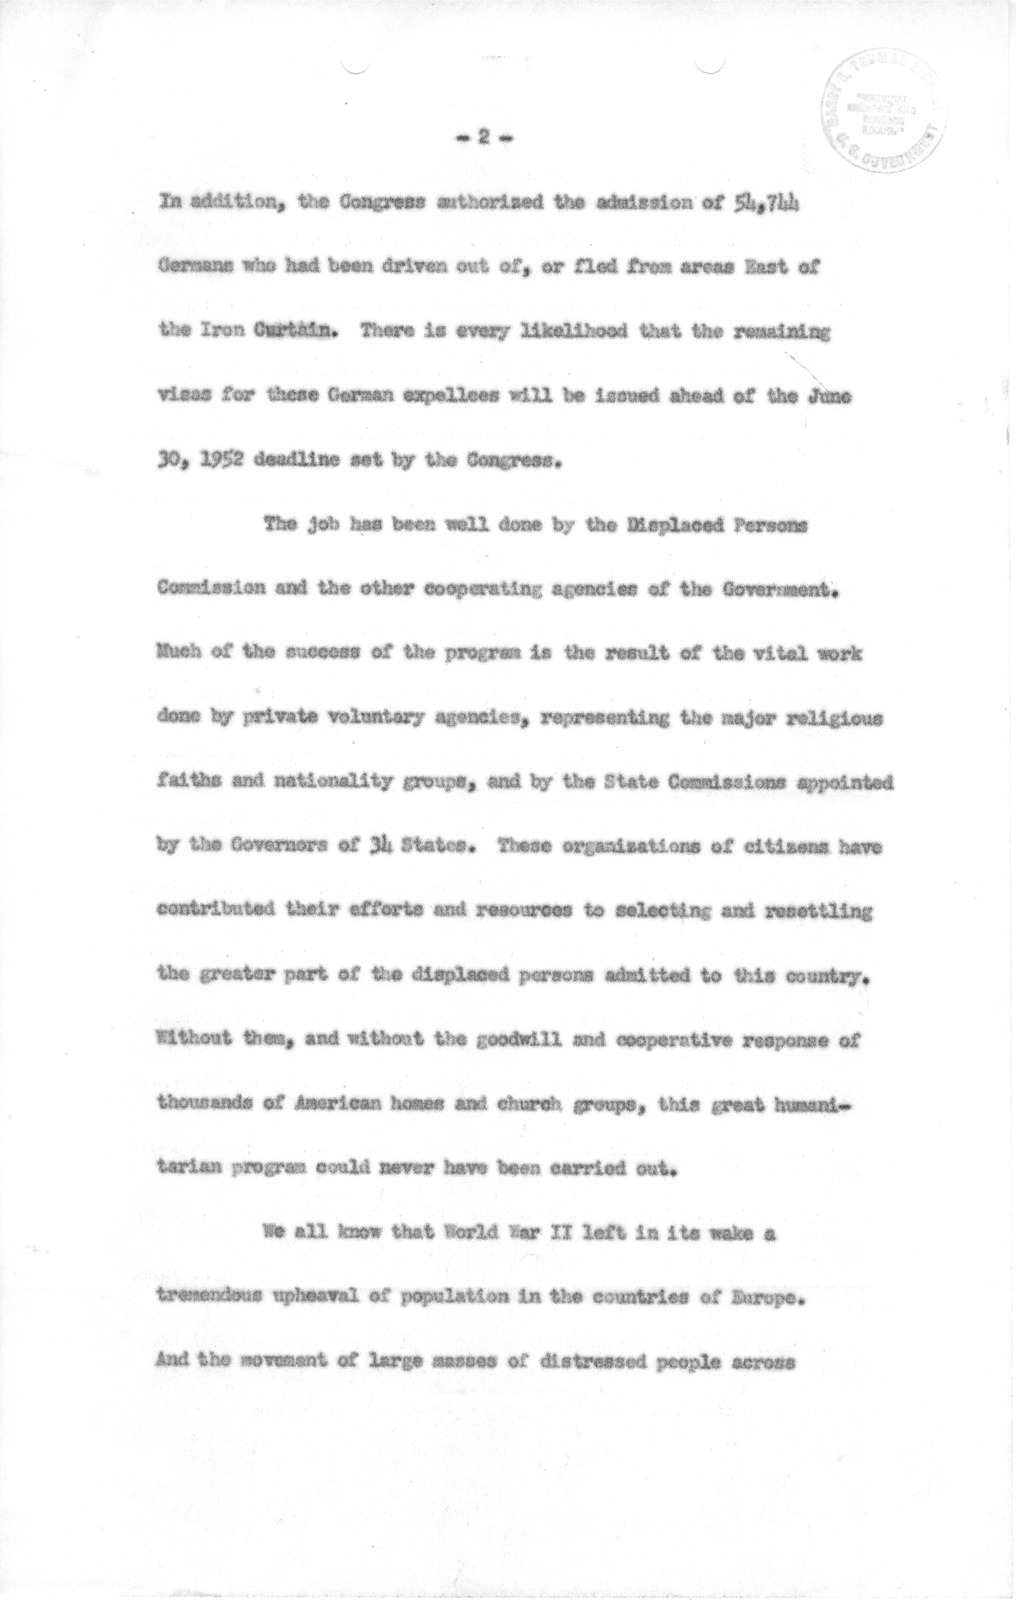 Memorandum from Richard Neustadt to James Lay with a Reply of S. Everett Gleason, with Attachment